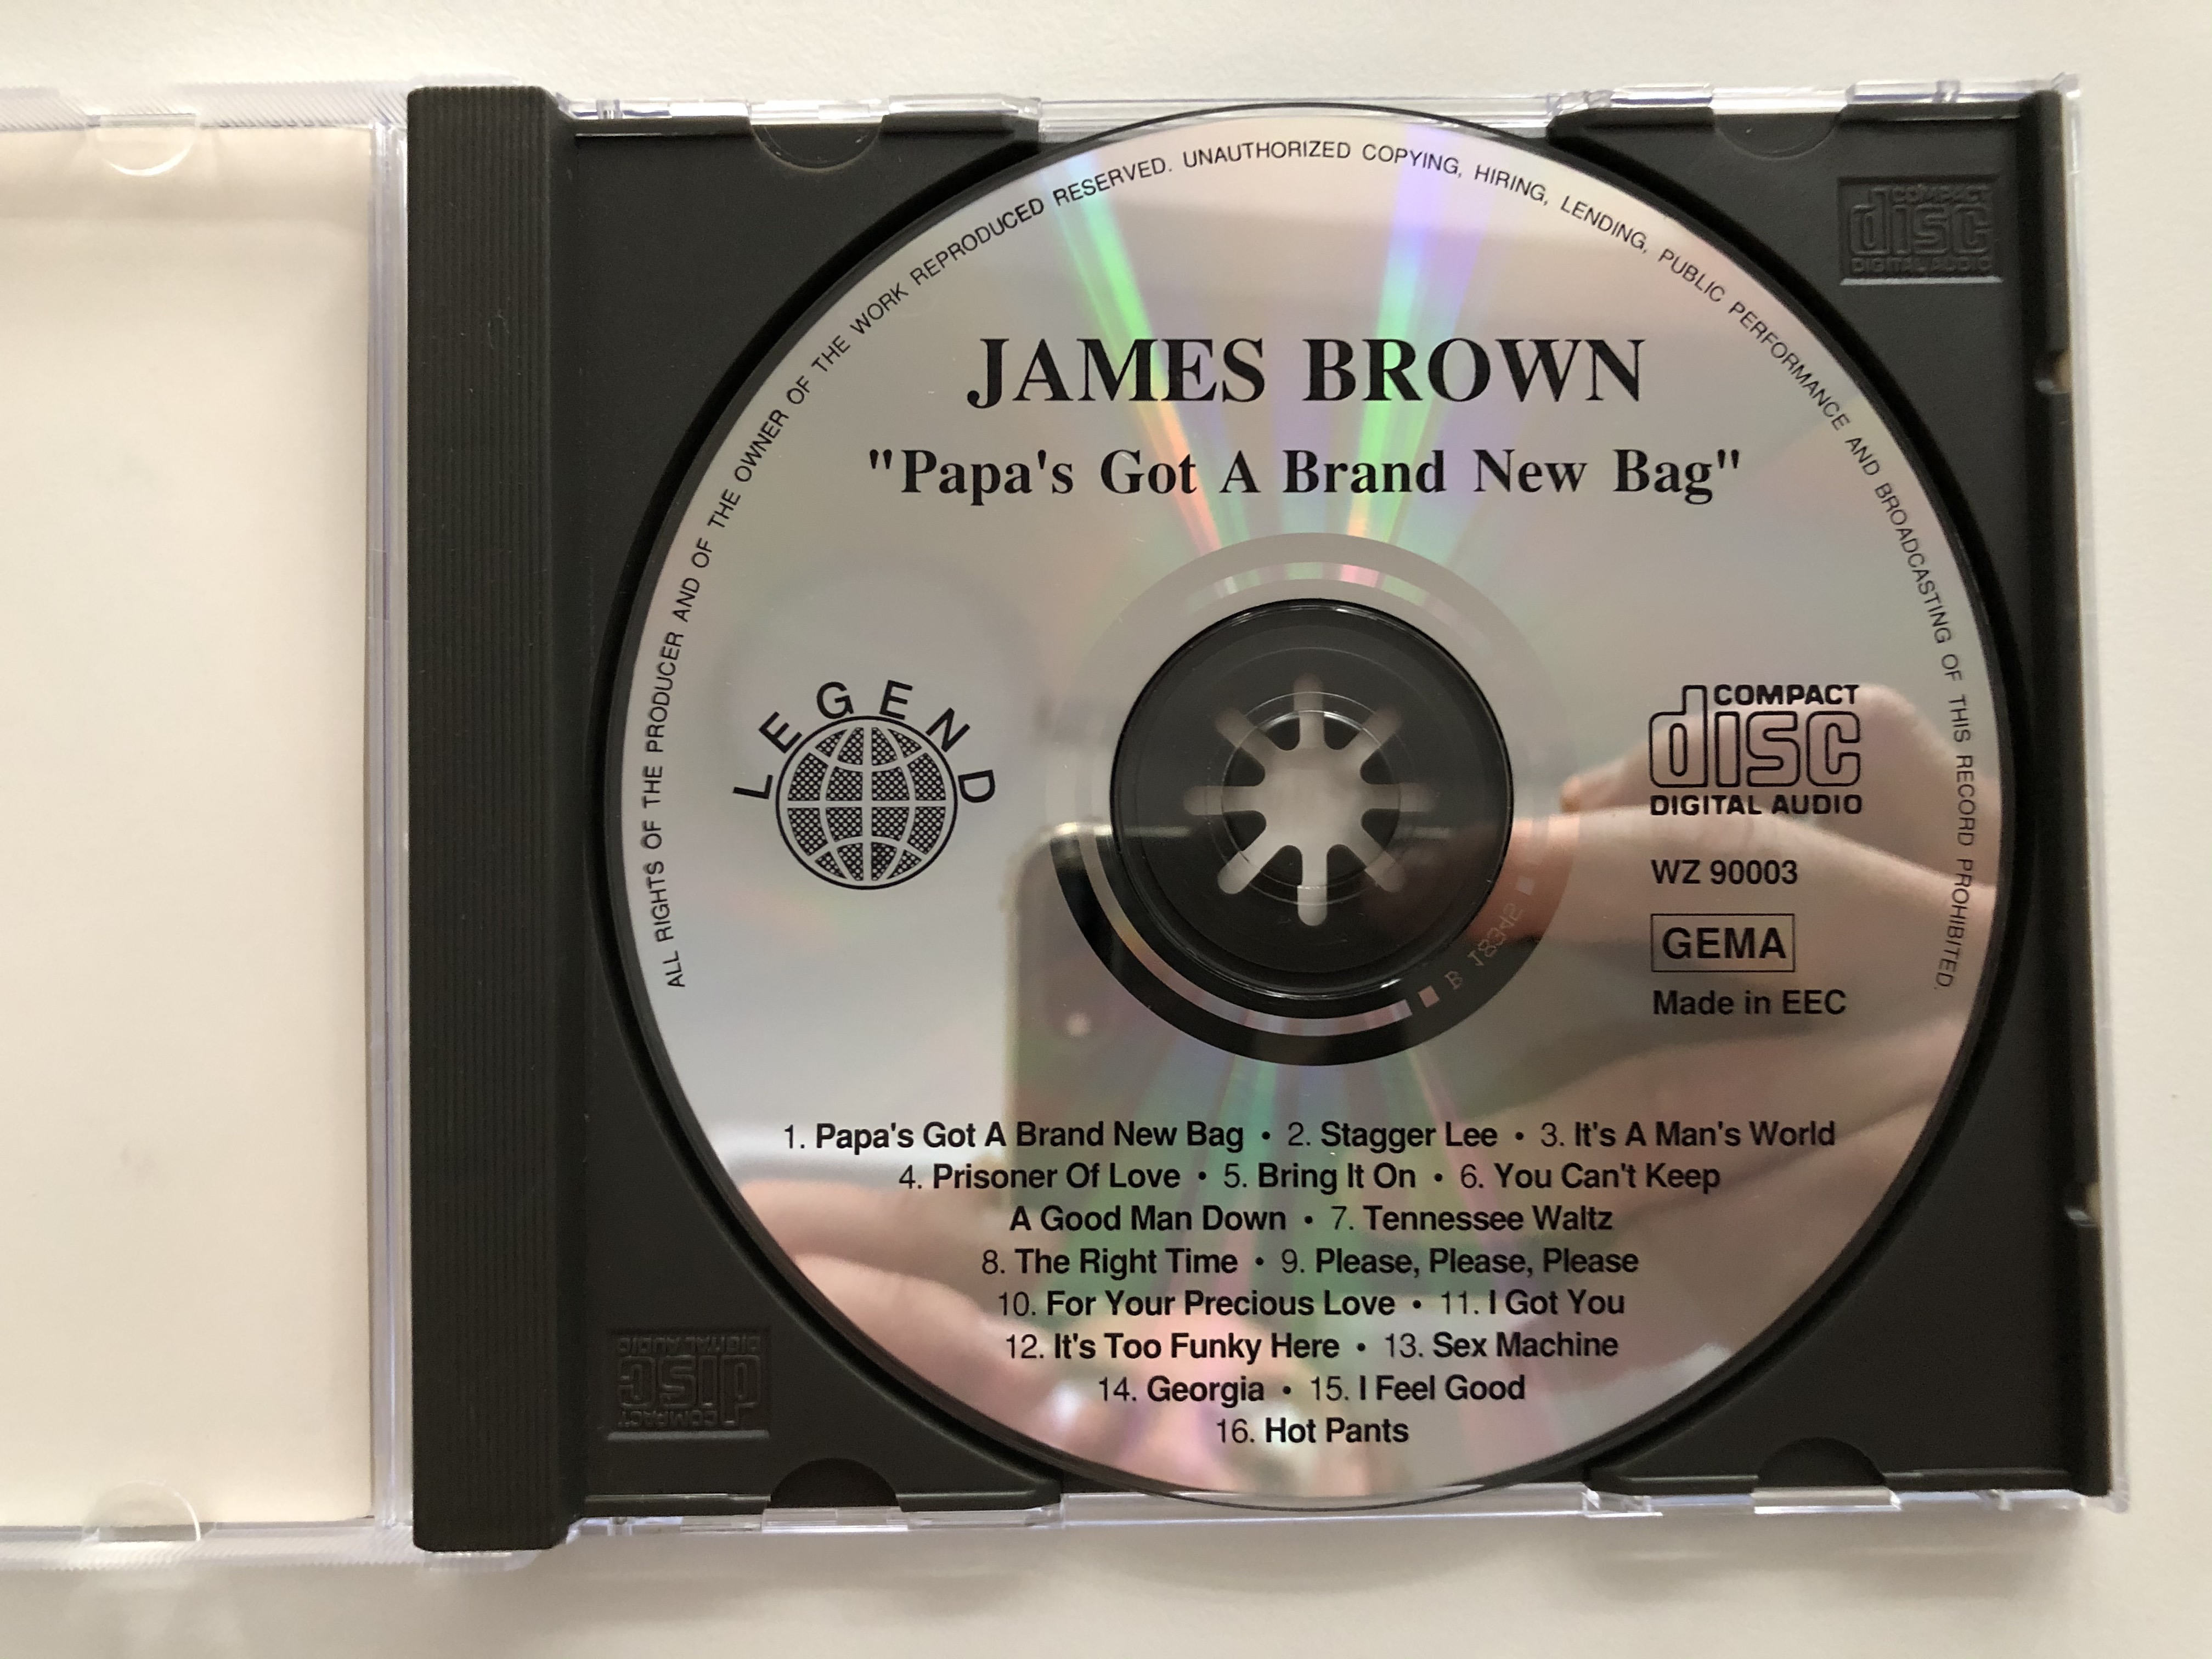 james-brown-papa-s-got-a-brand-new-bag-stagger-lee-it-s-a-man-s-world-tennessee-waltz-sex-machine-i-feel-good-and-many-more...-legend-audio-cd-1993-wz-90003-2-.jpg